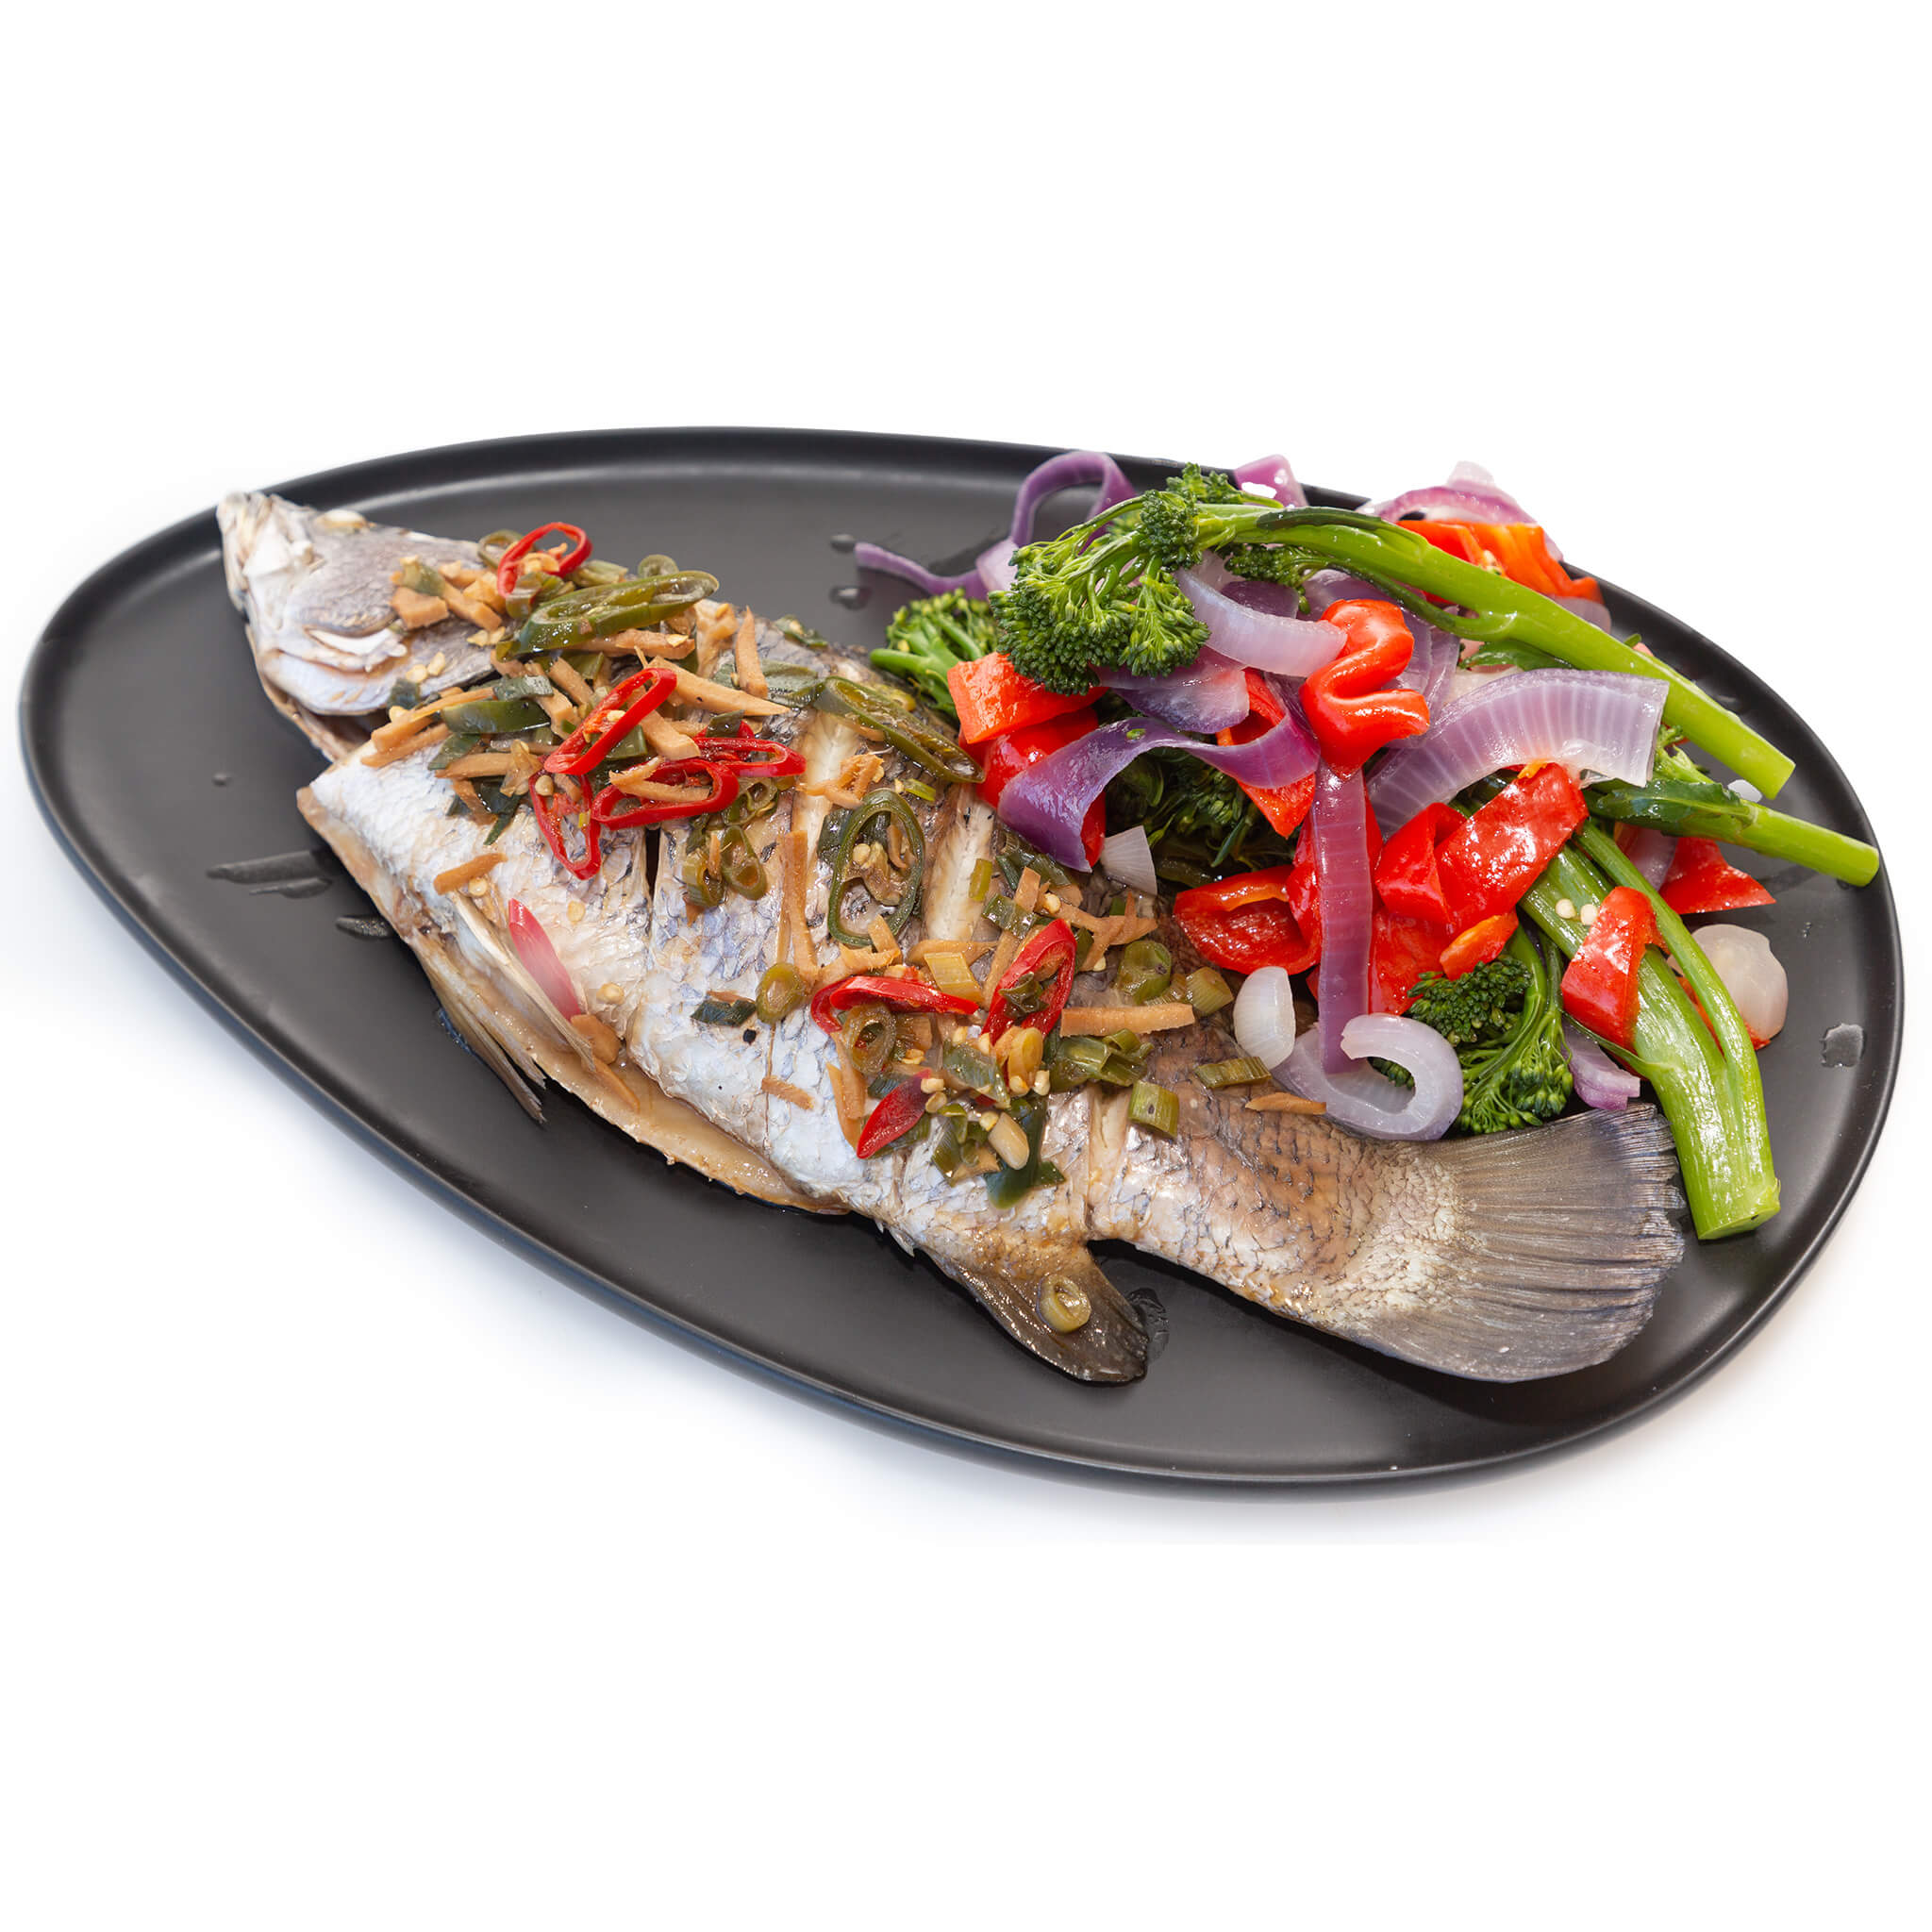 Baby Barramundi marinated with vegetables from steve costi seafood